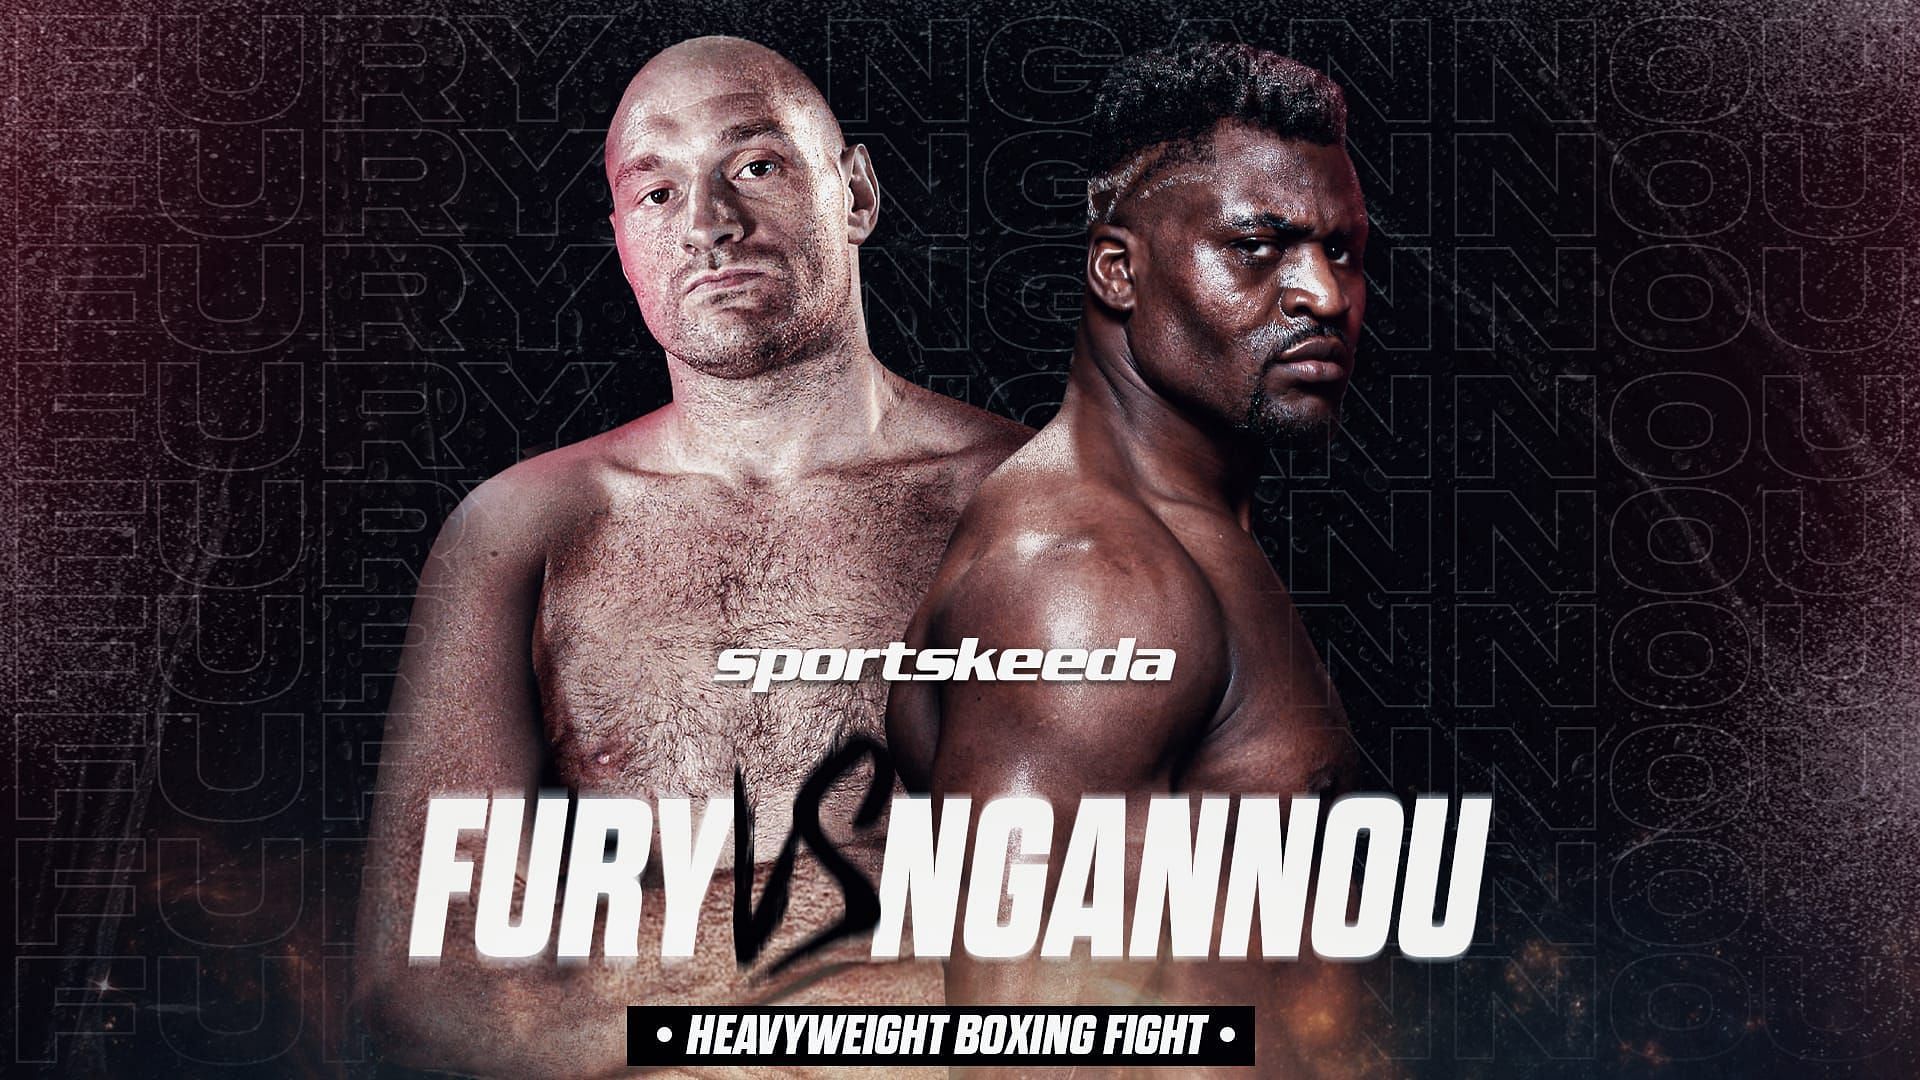 Tyson Fury vs Francis Ngannou might be coming soon